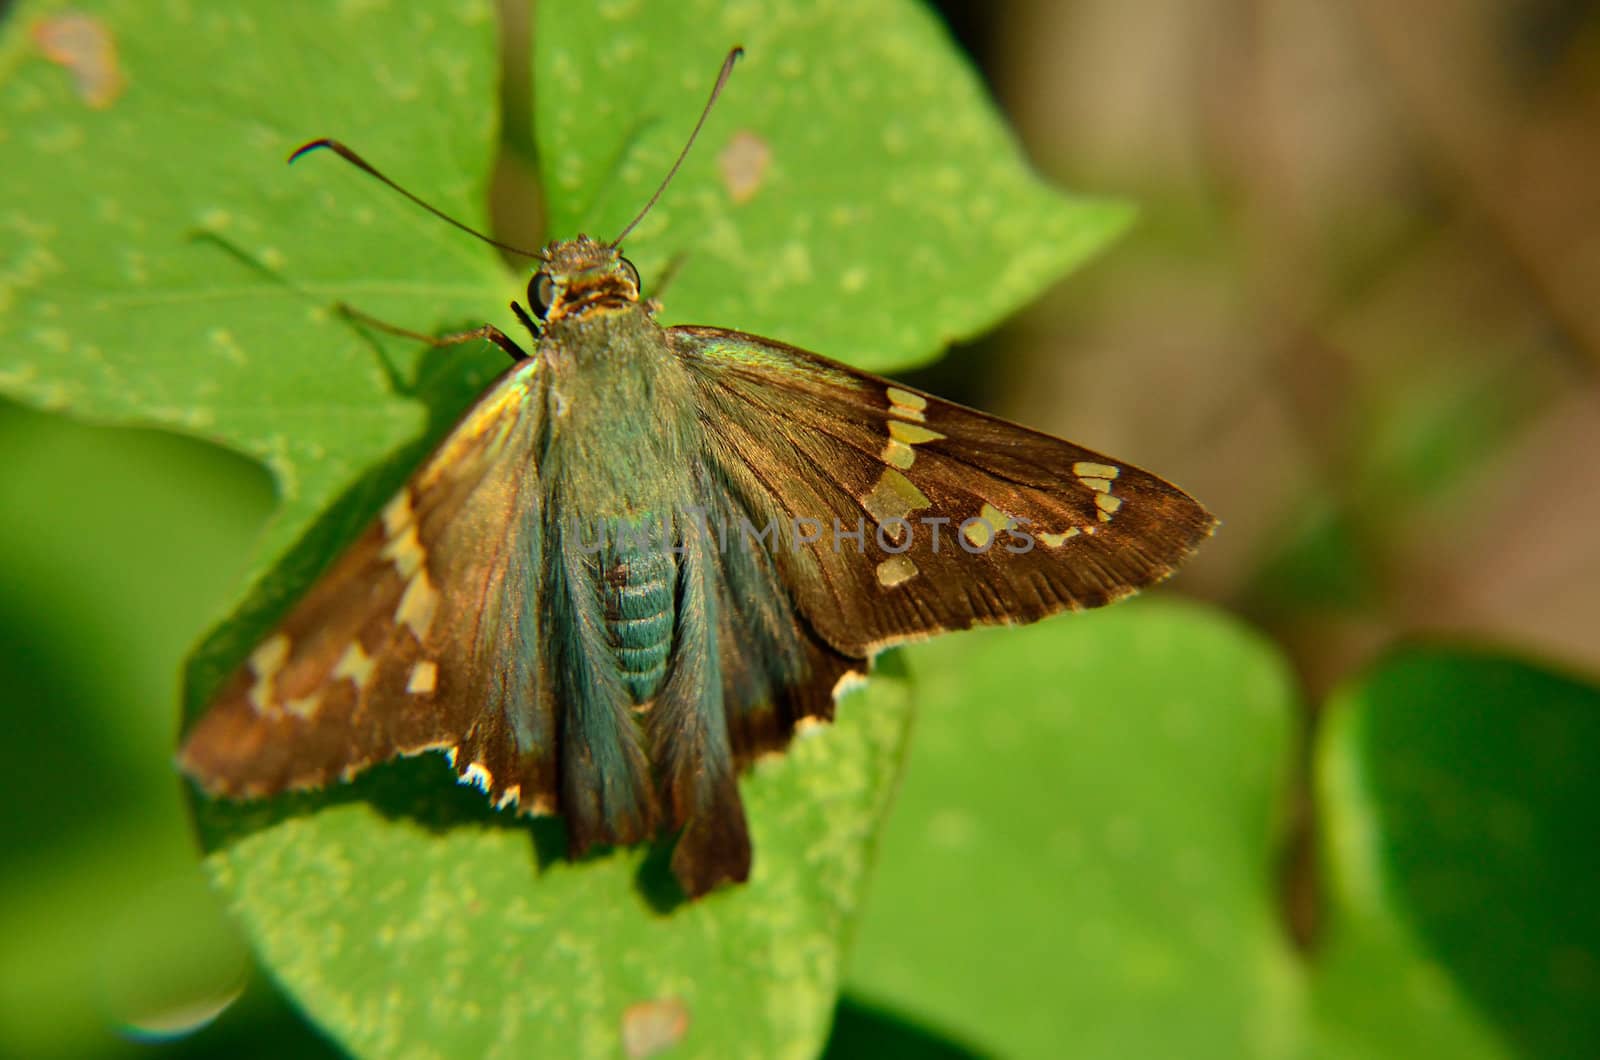 Blue and brown moth lands on morning glory vine's leaves







insect, moth, bug, bugs, insect, blue, brown